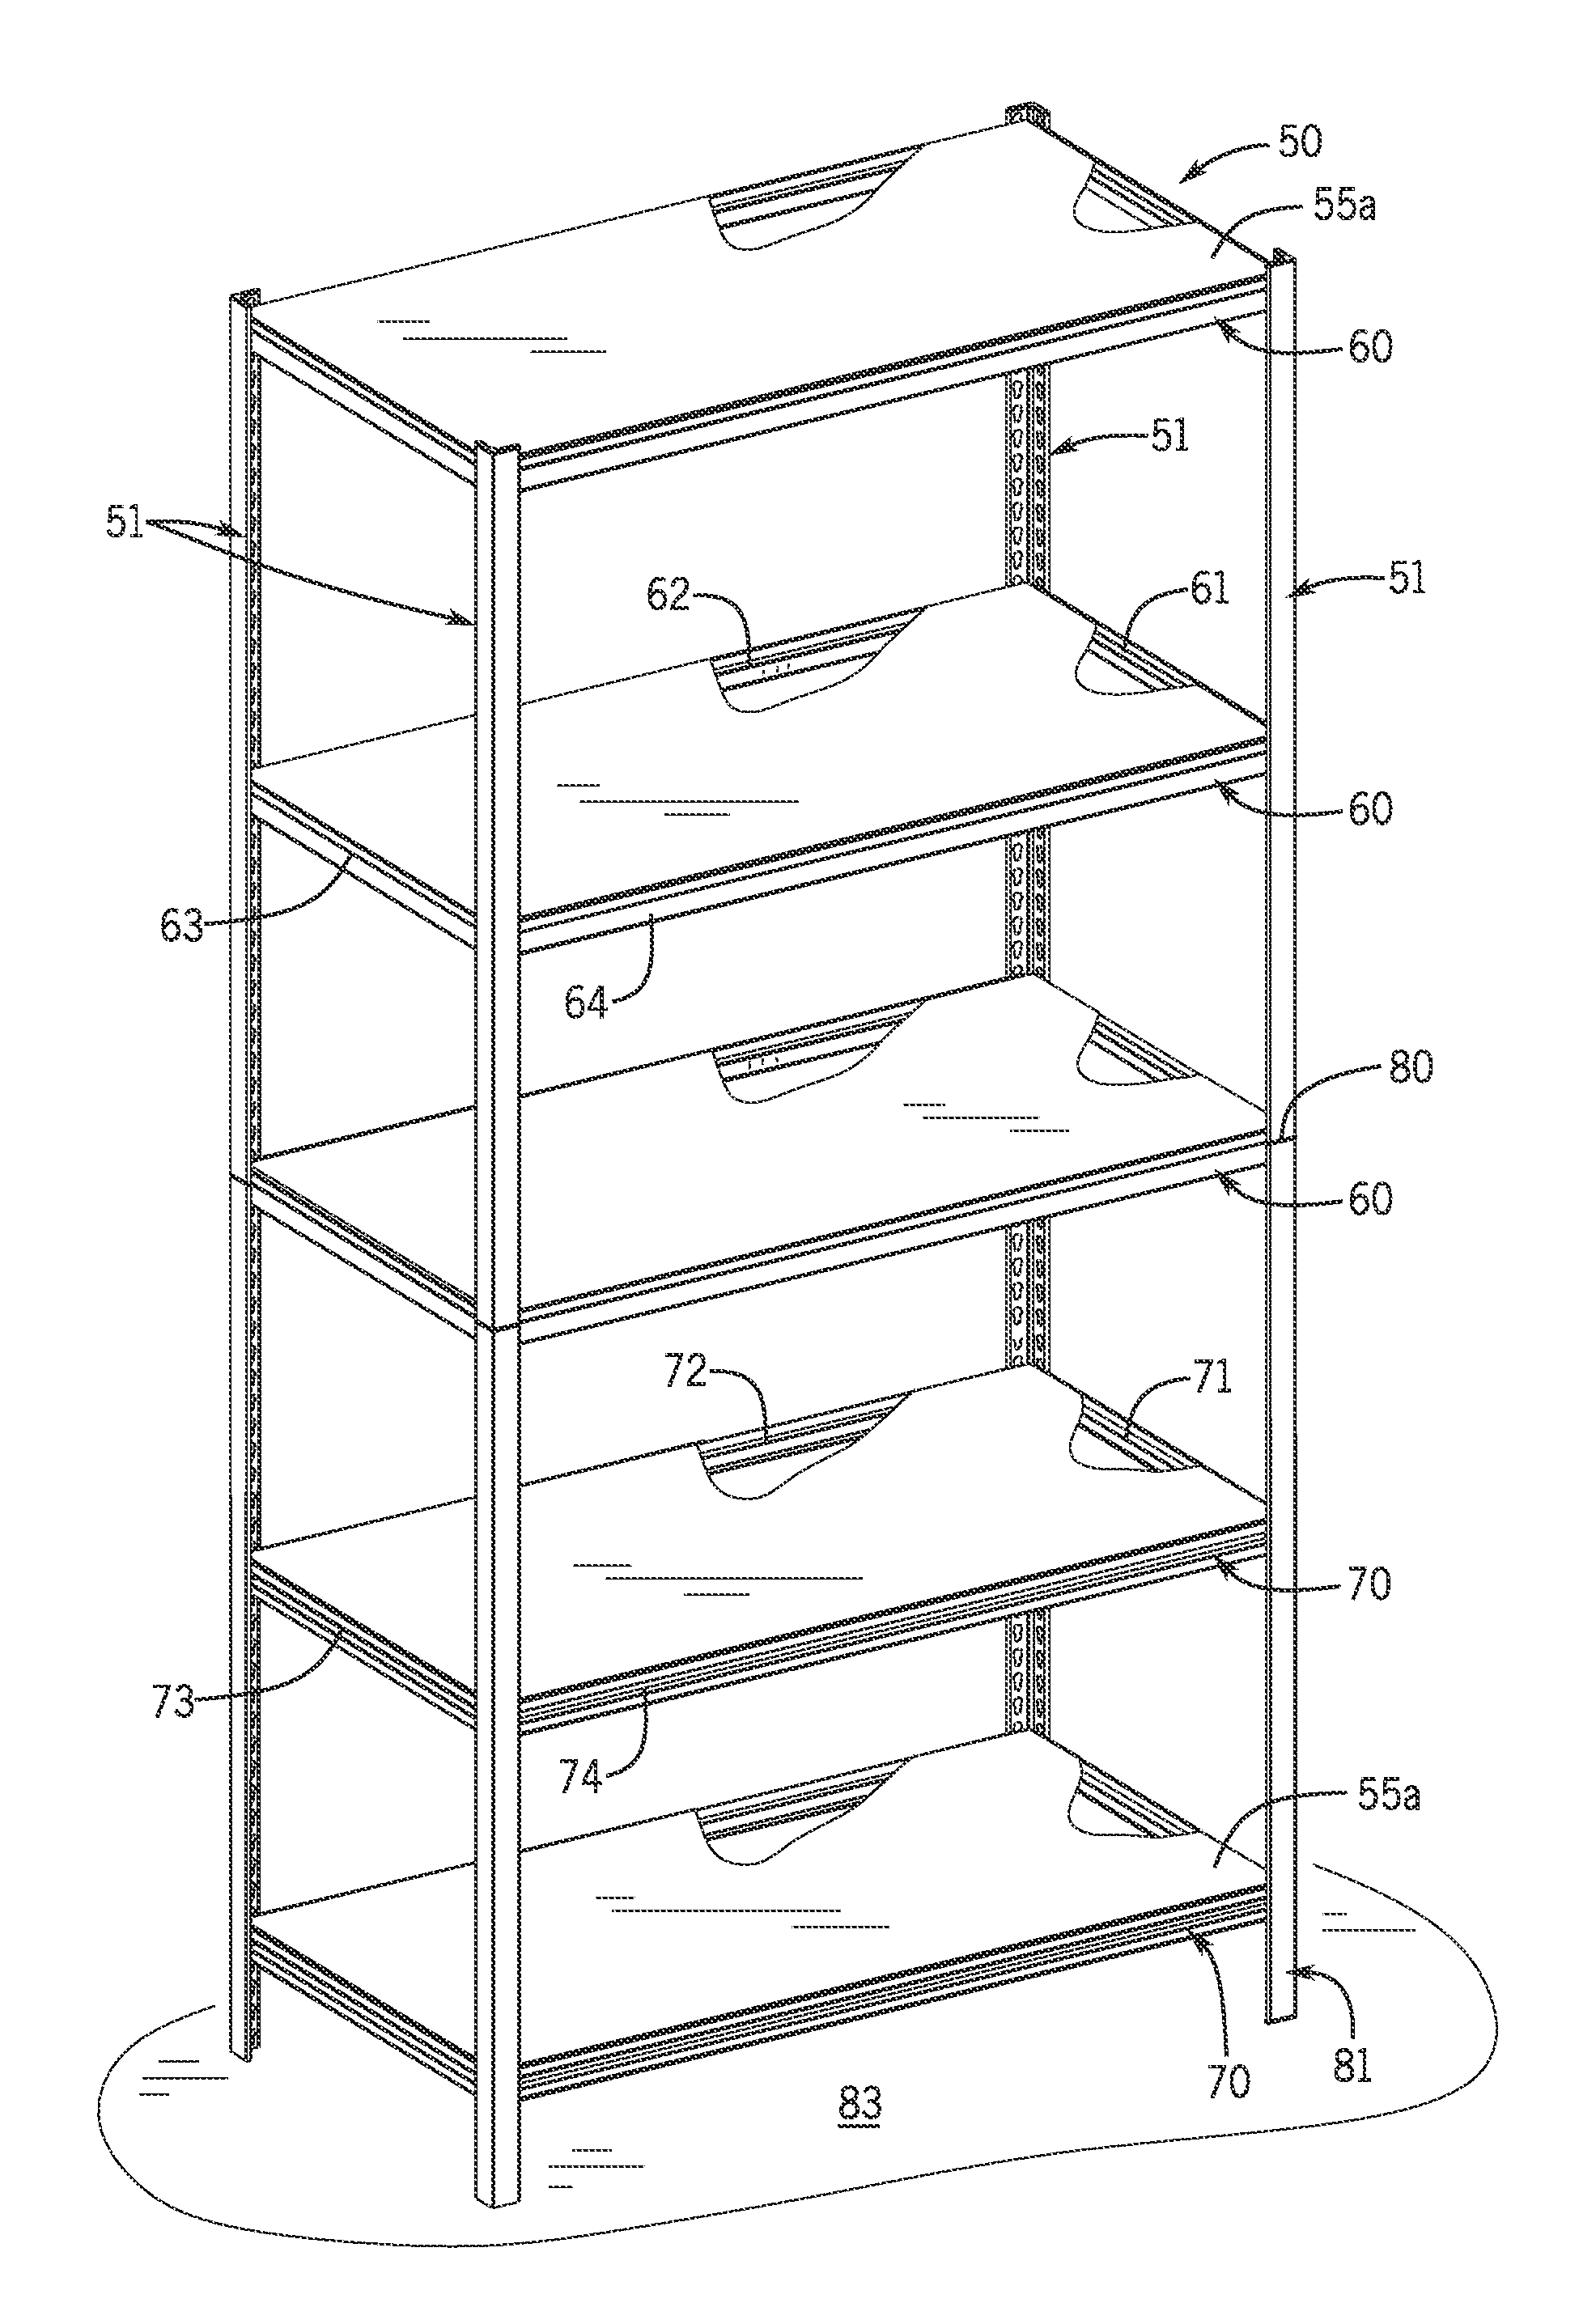 Shelving System Having Improved Structural Characteristics